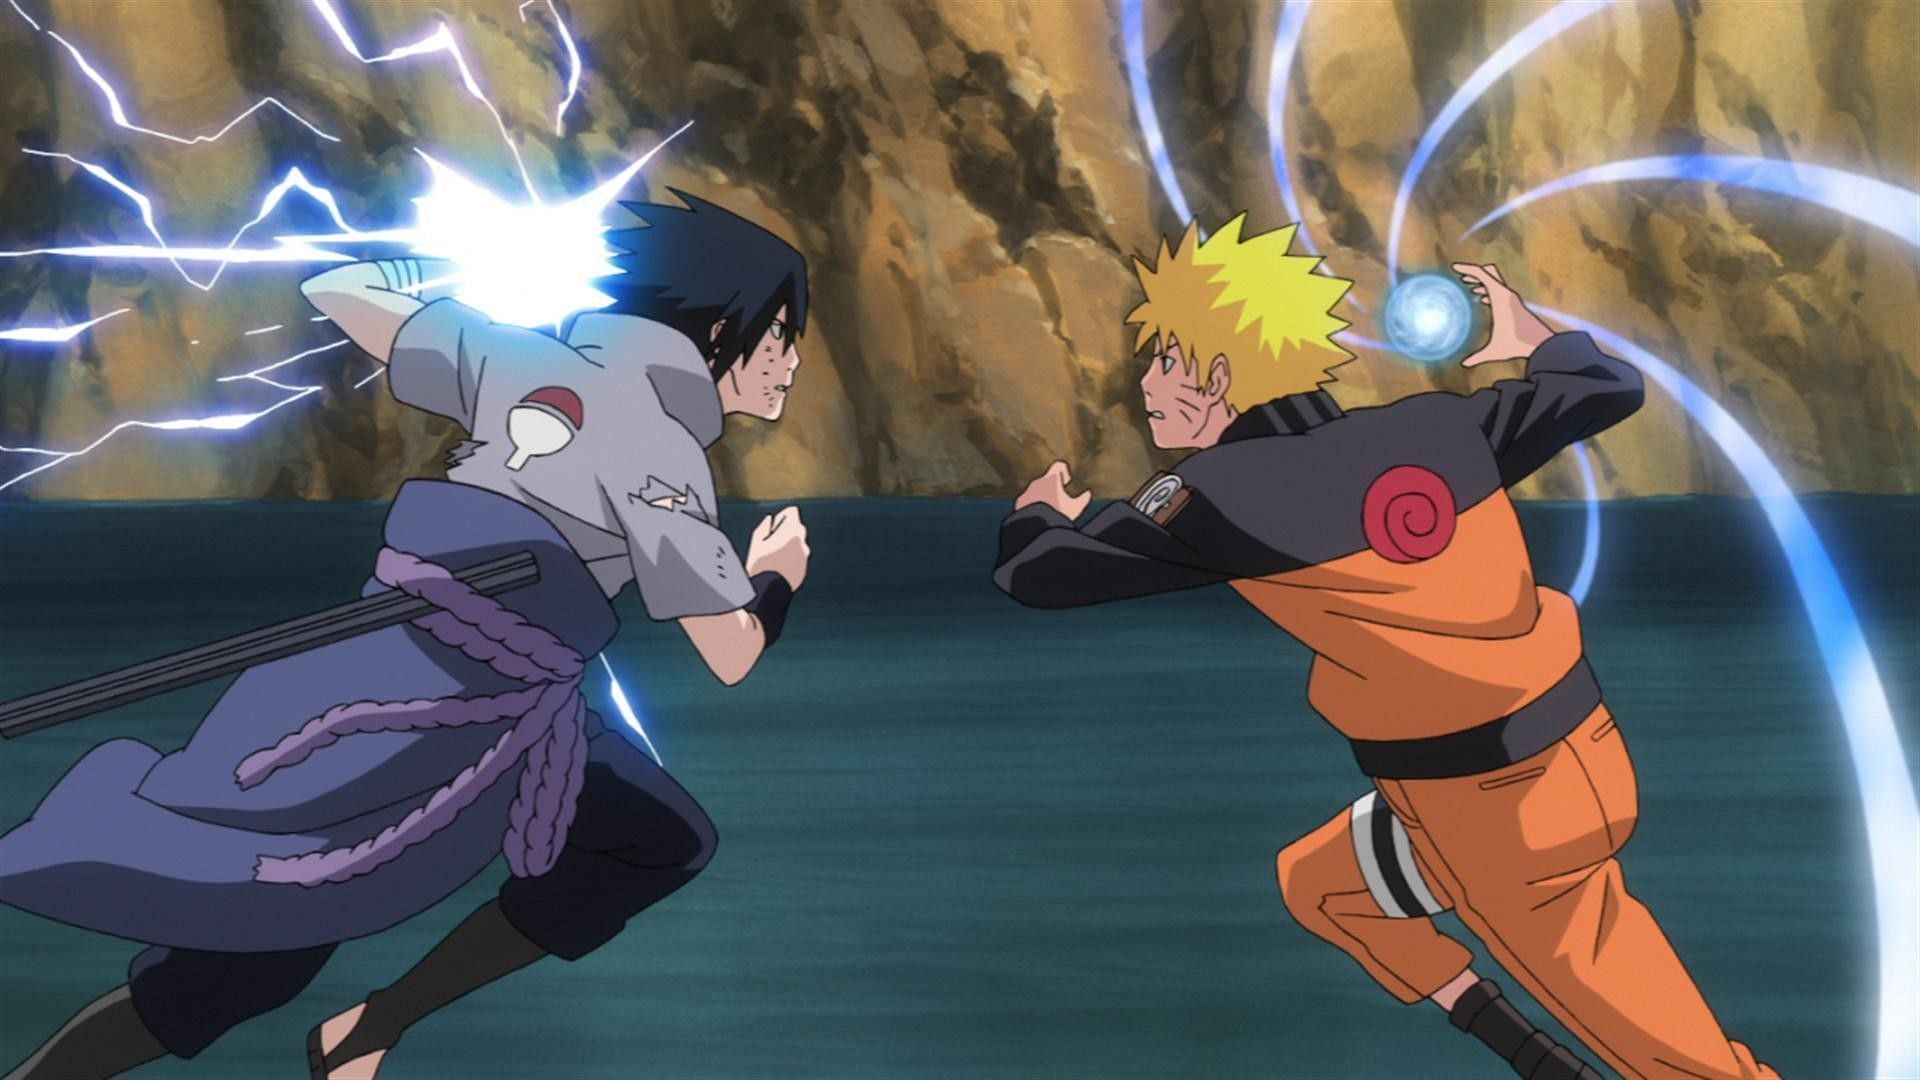 The two characters during a fight (Image via Studio Pierrot)